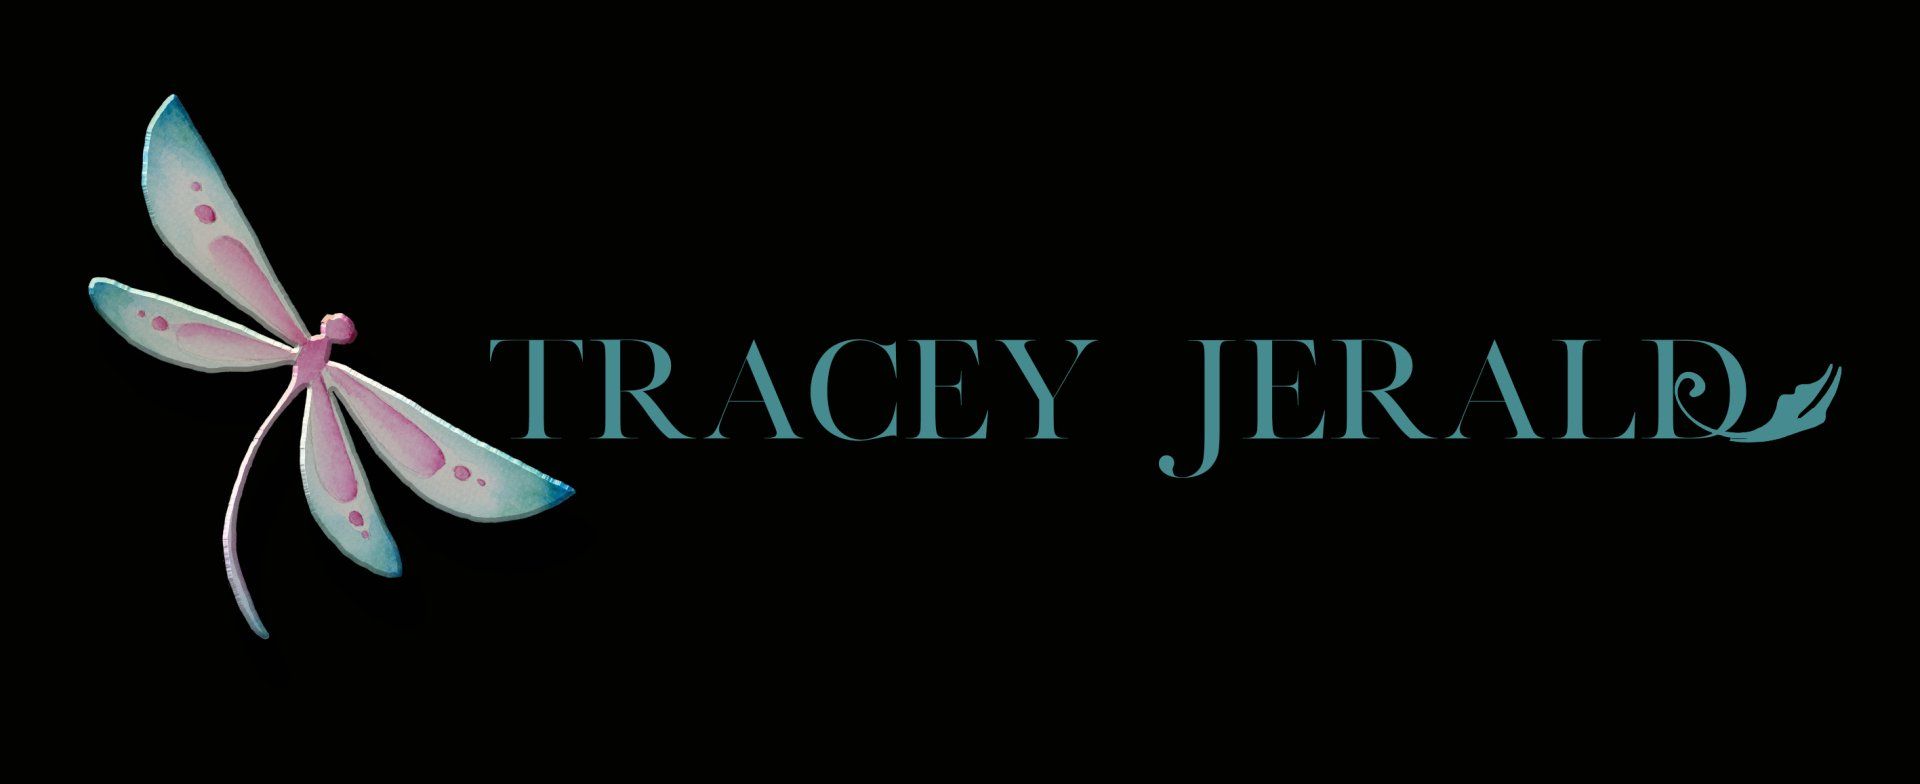 Tracey Jerald